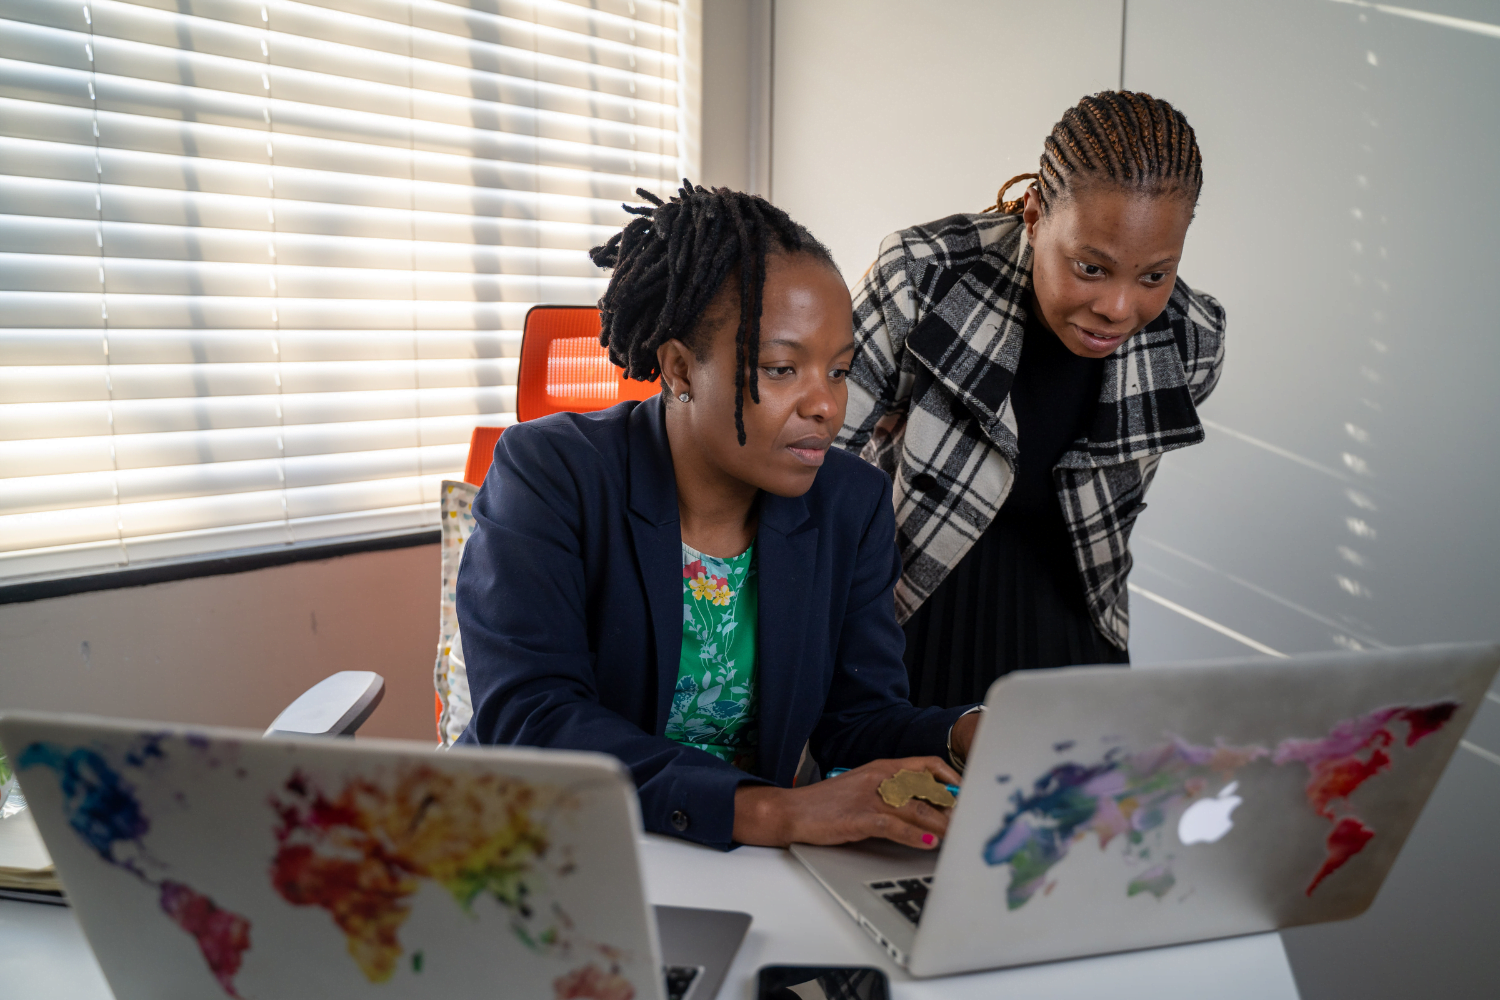 Dudu Makhari, Founder of Ngangezwe Foundation in South Africa, is sat in her office on the laptop, showing a male employee something on the computer.